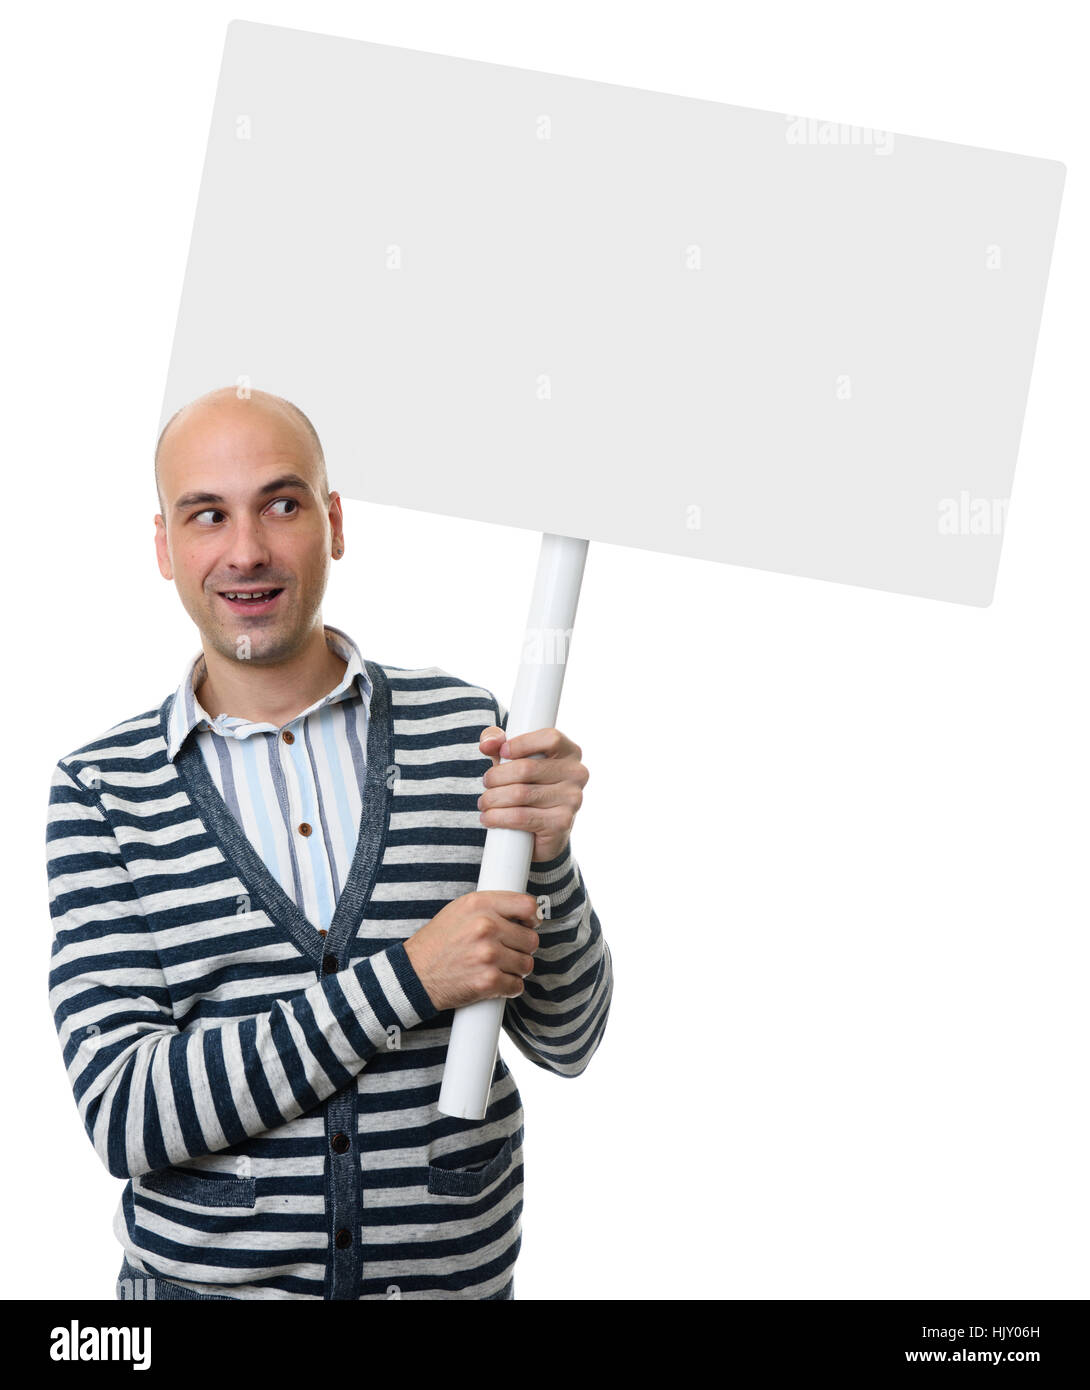 casual bald man holding placard on a stick. Isolated on white background Stock Photo